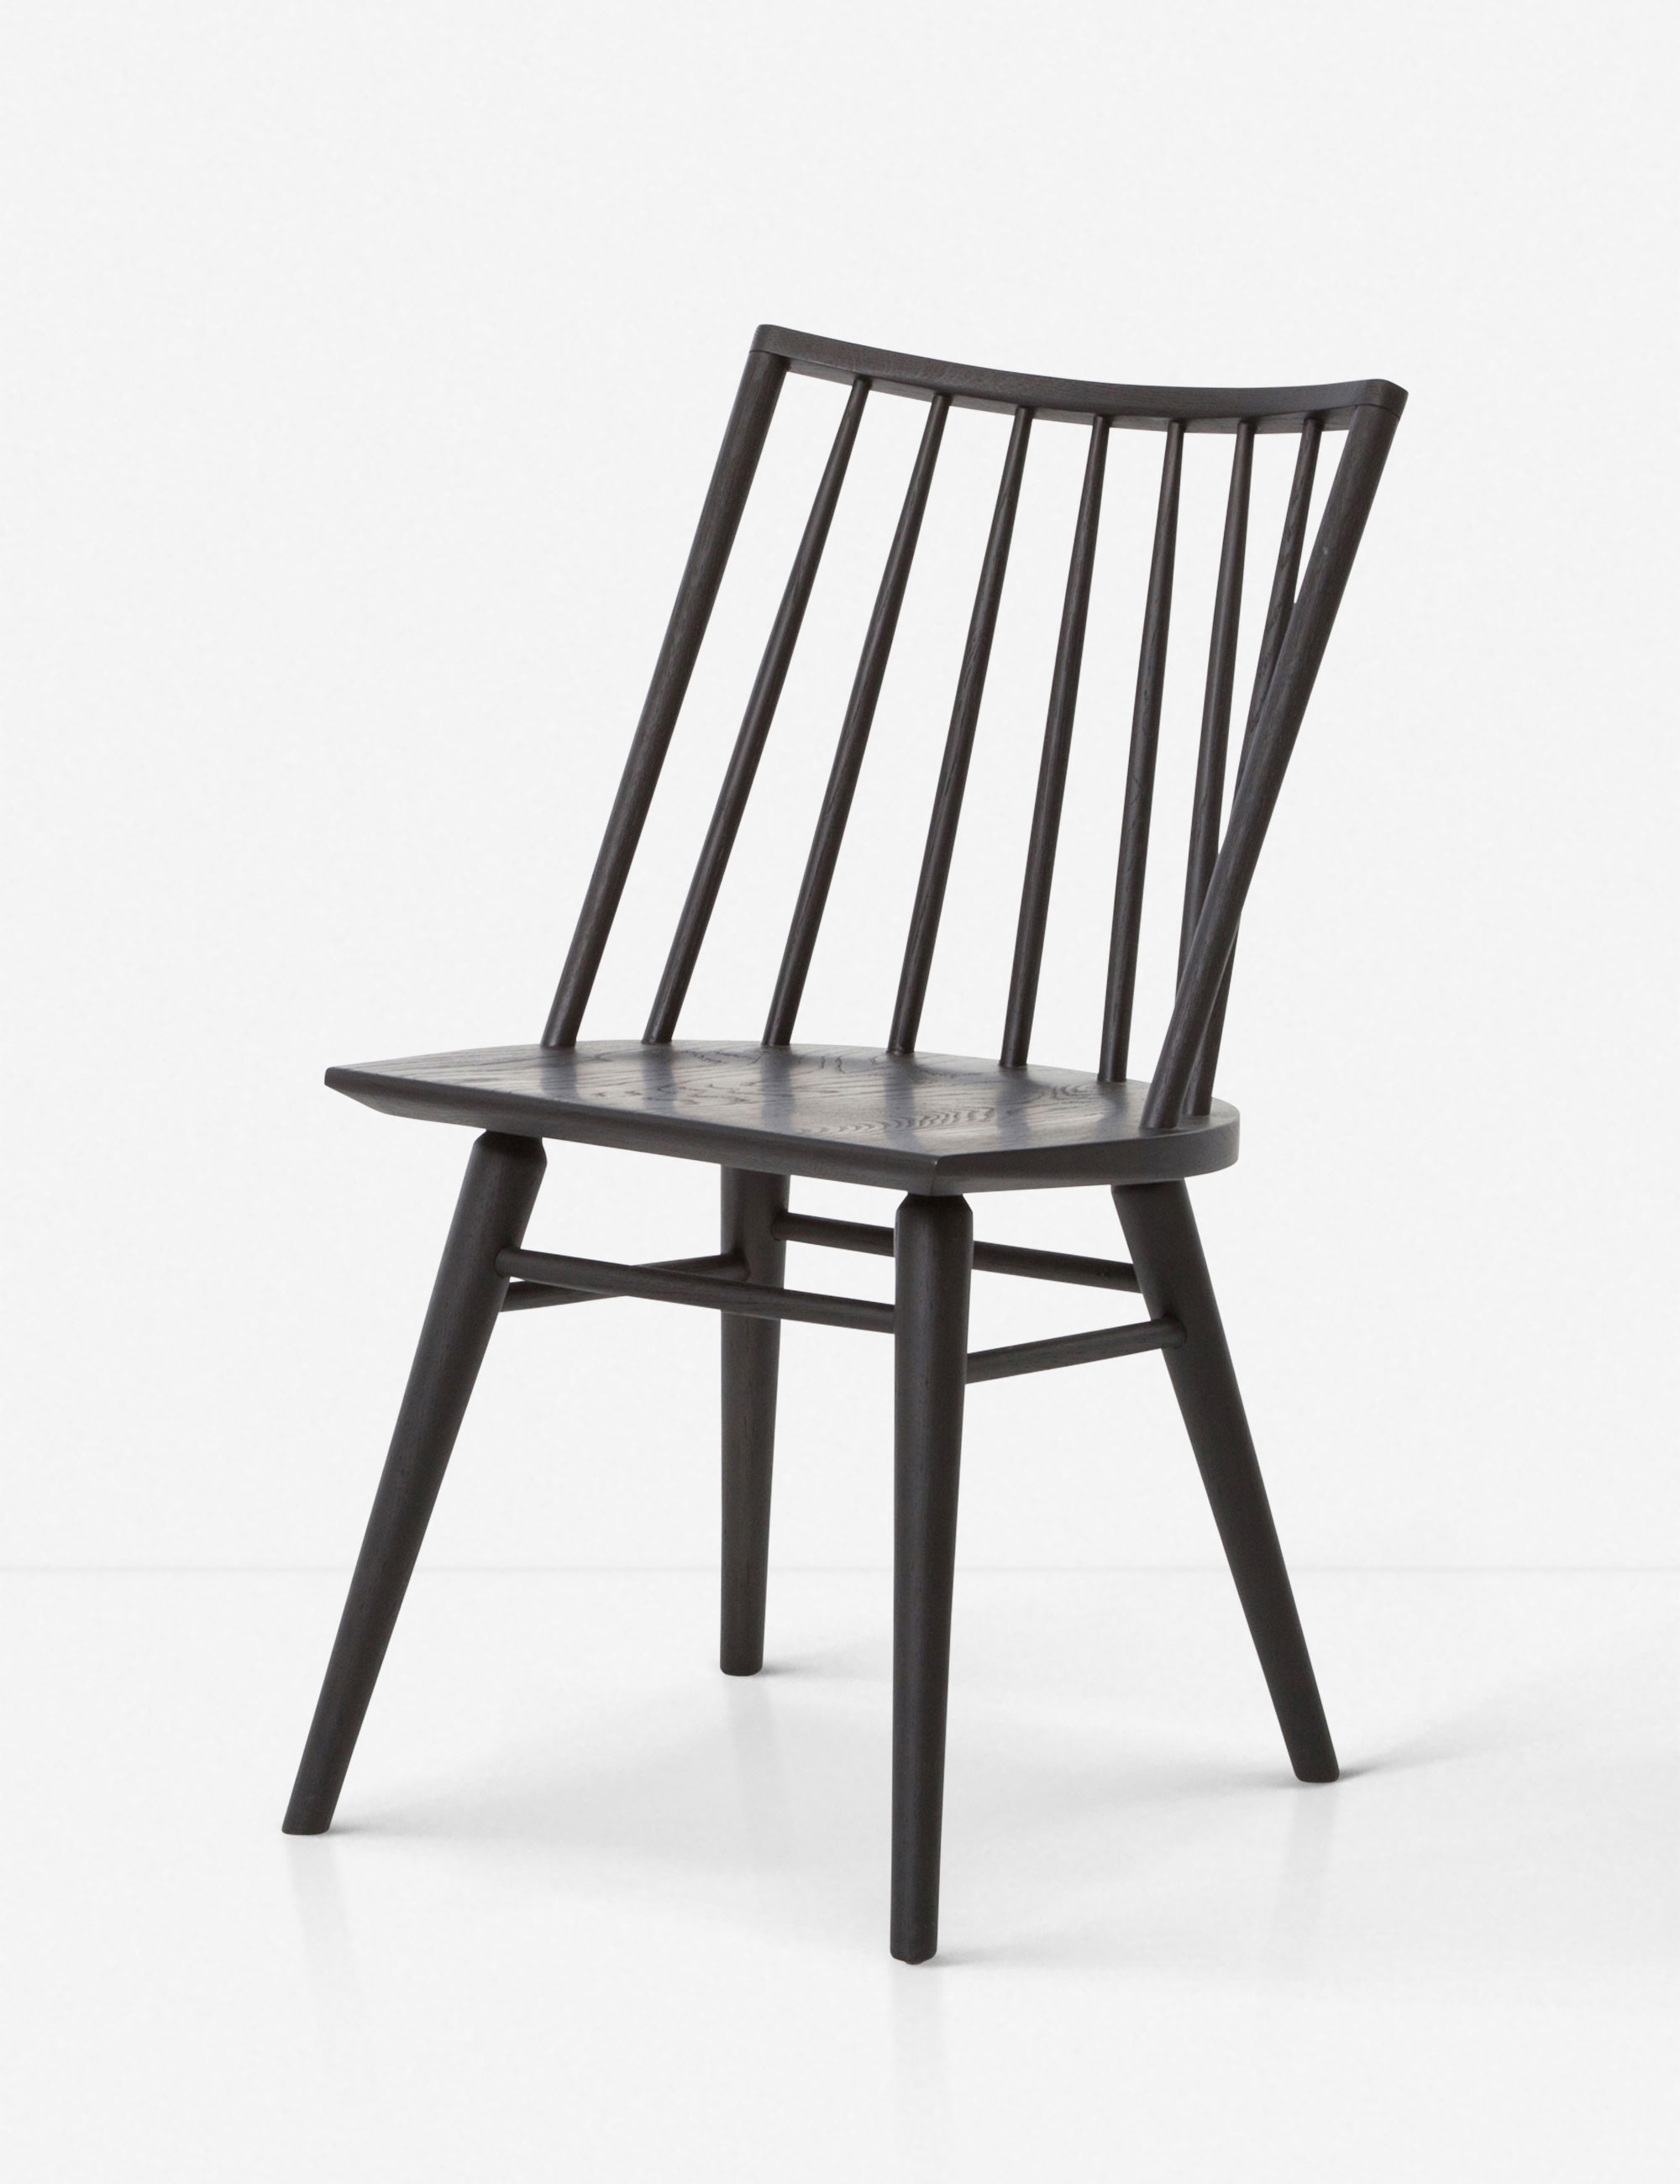 Lanae Dining Chair - Image 3